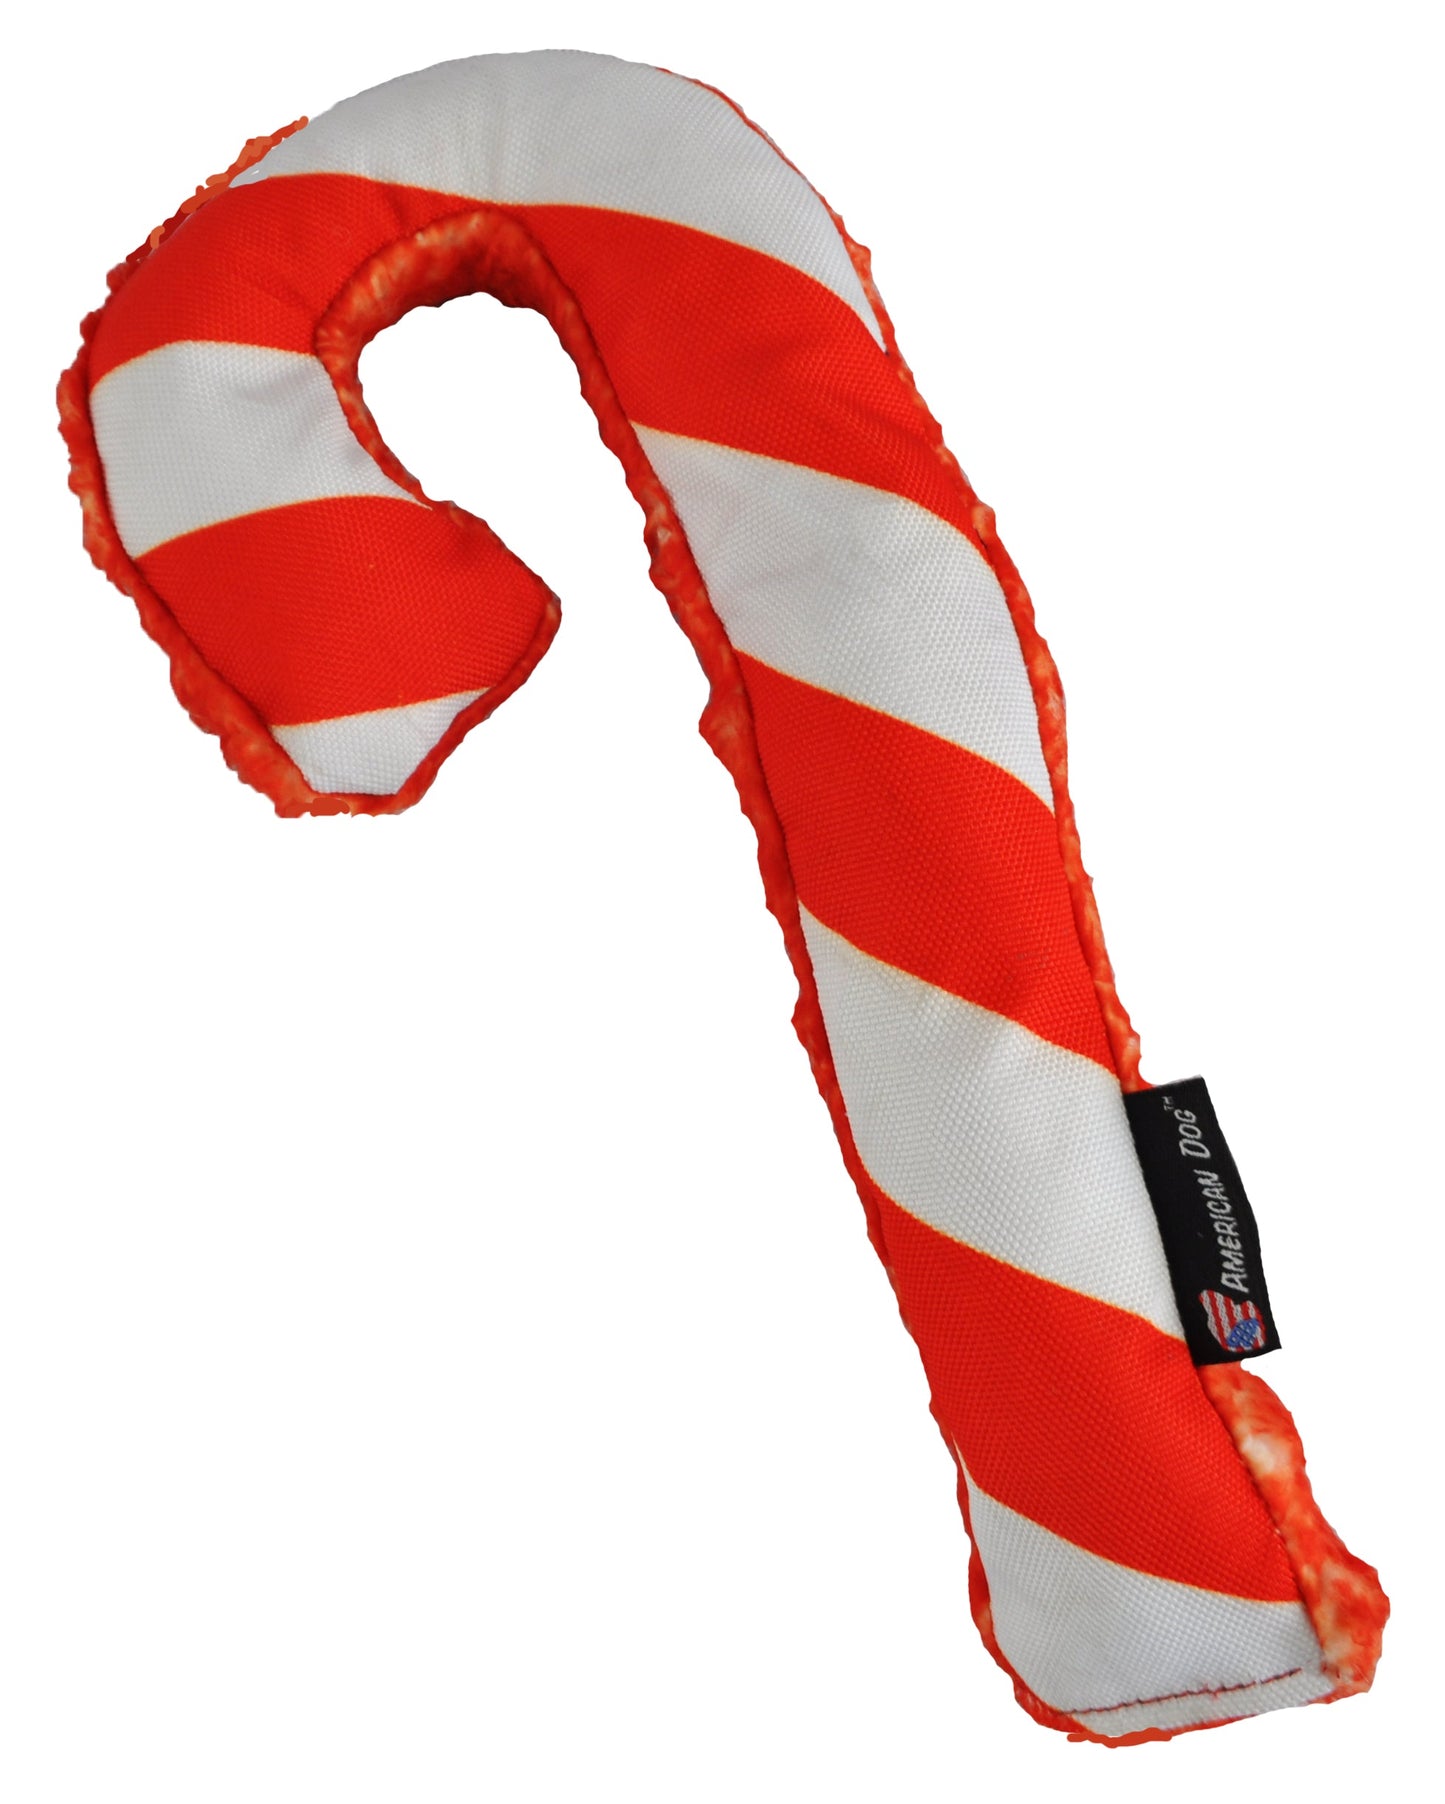 Candy Cane Squeaky Toy